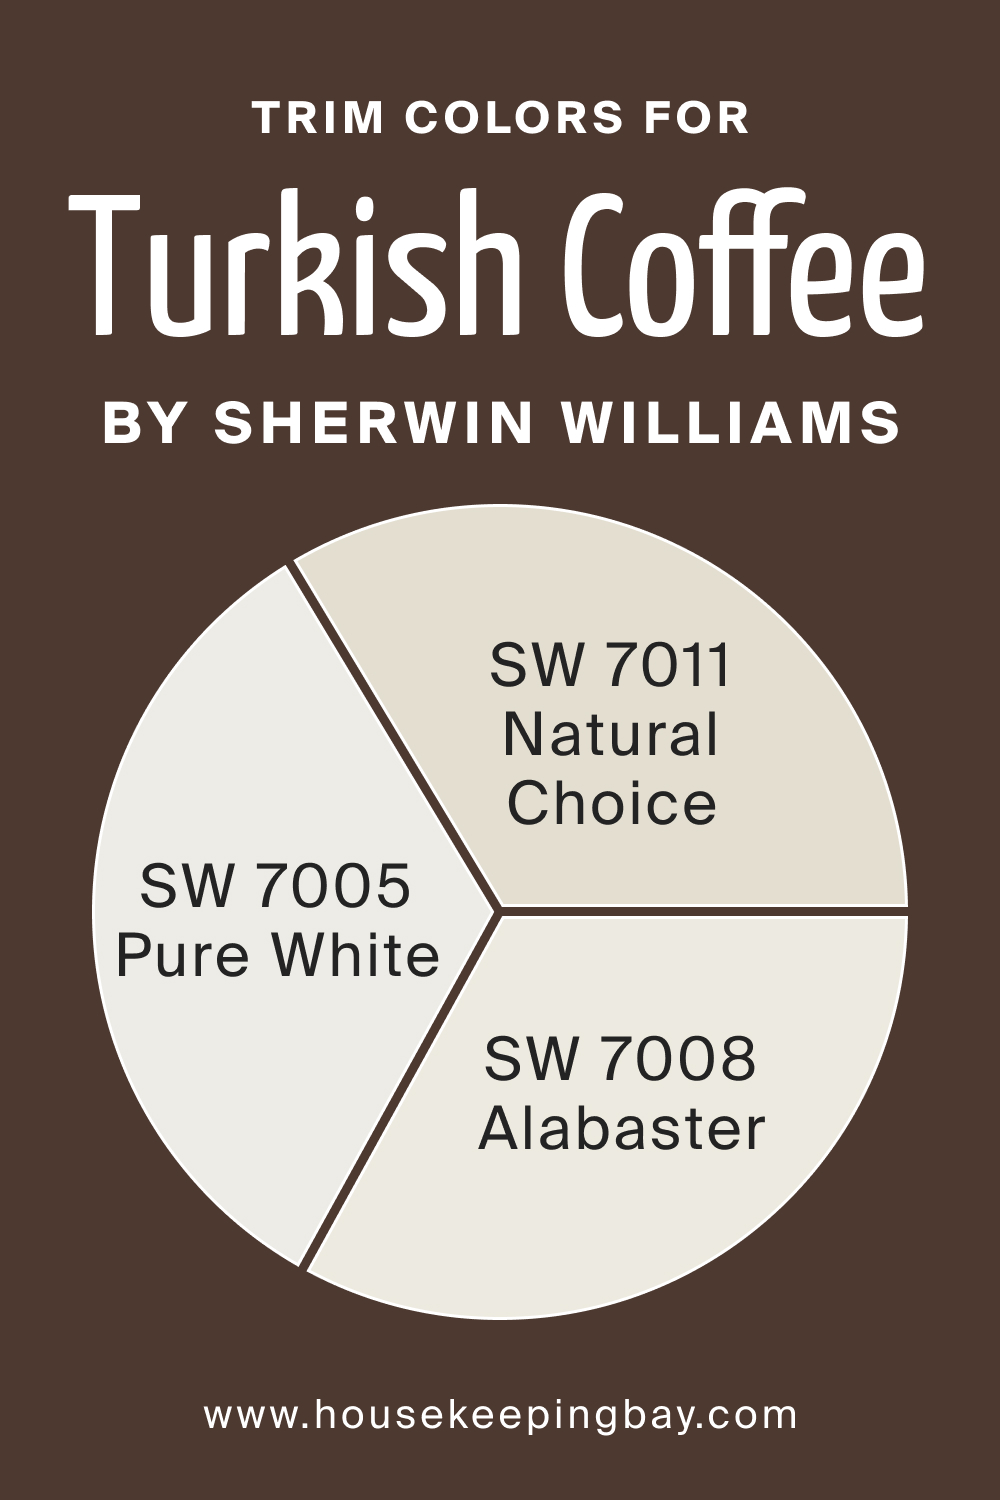 Trim Colors of SW 6076 Turkish Coffee by Sherwin Williams